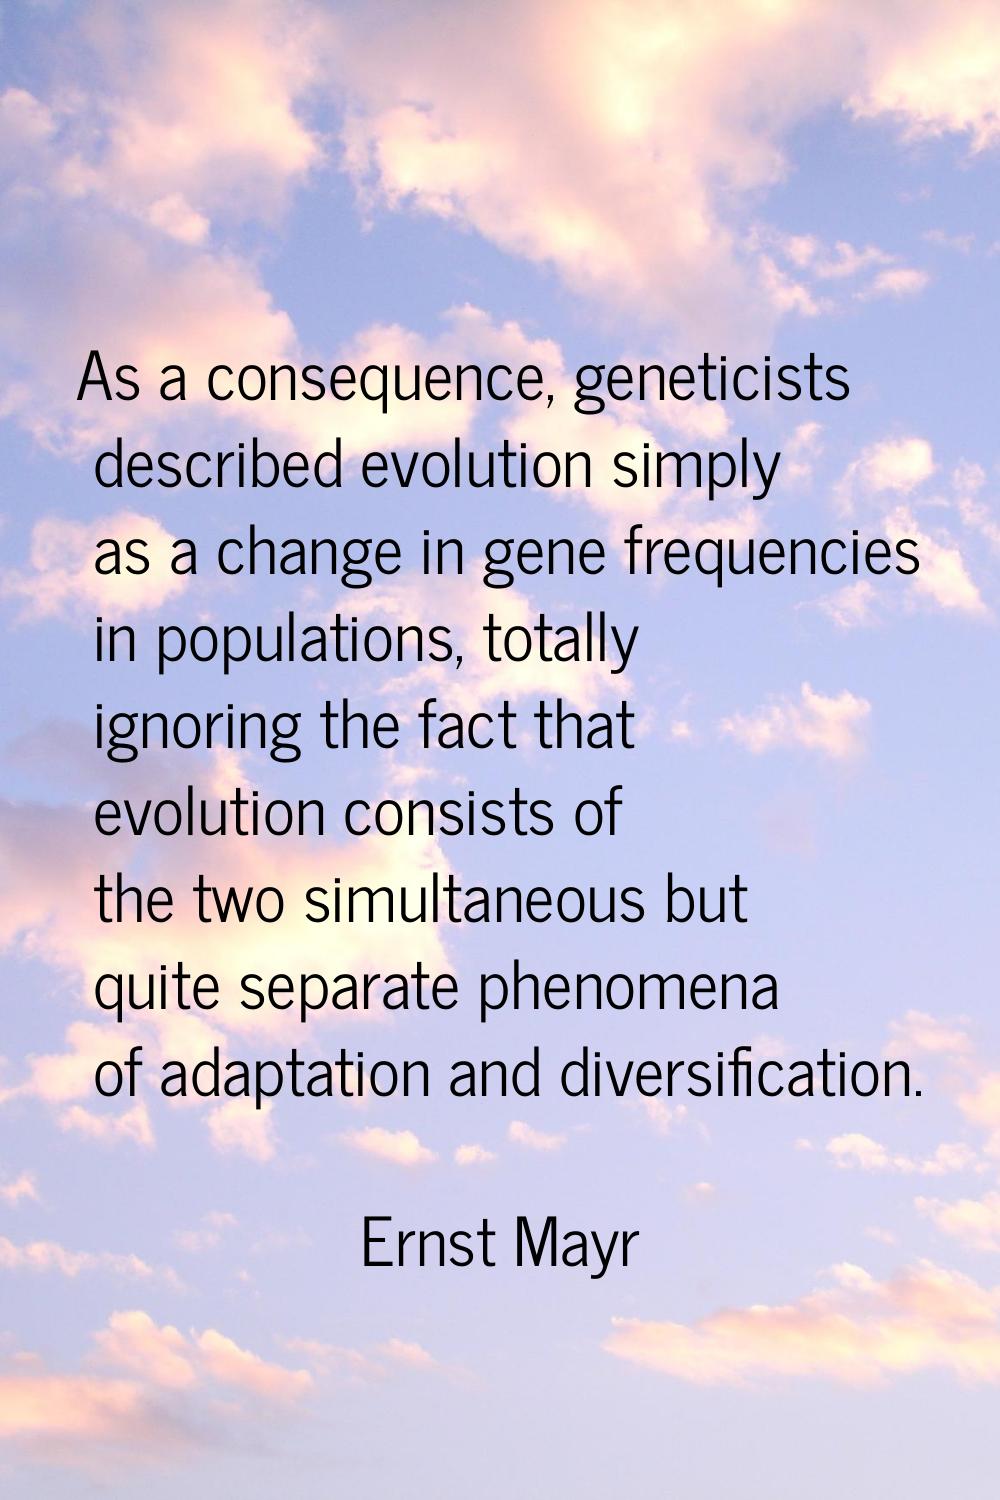 As a consequence, geneticists described evolution simply as a change in gene frequencies in populat